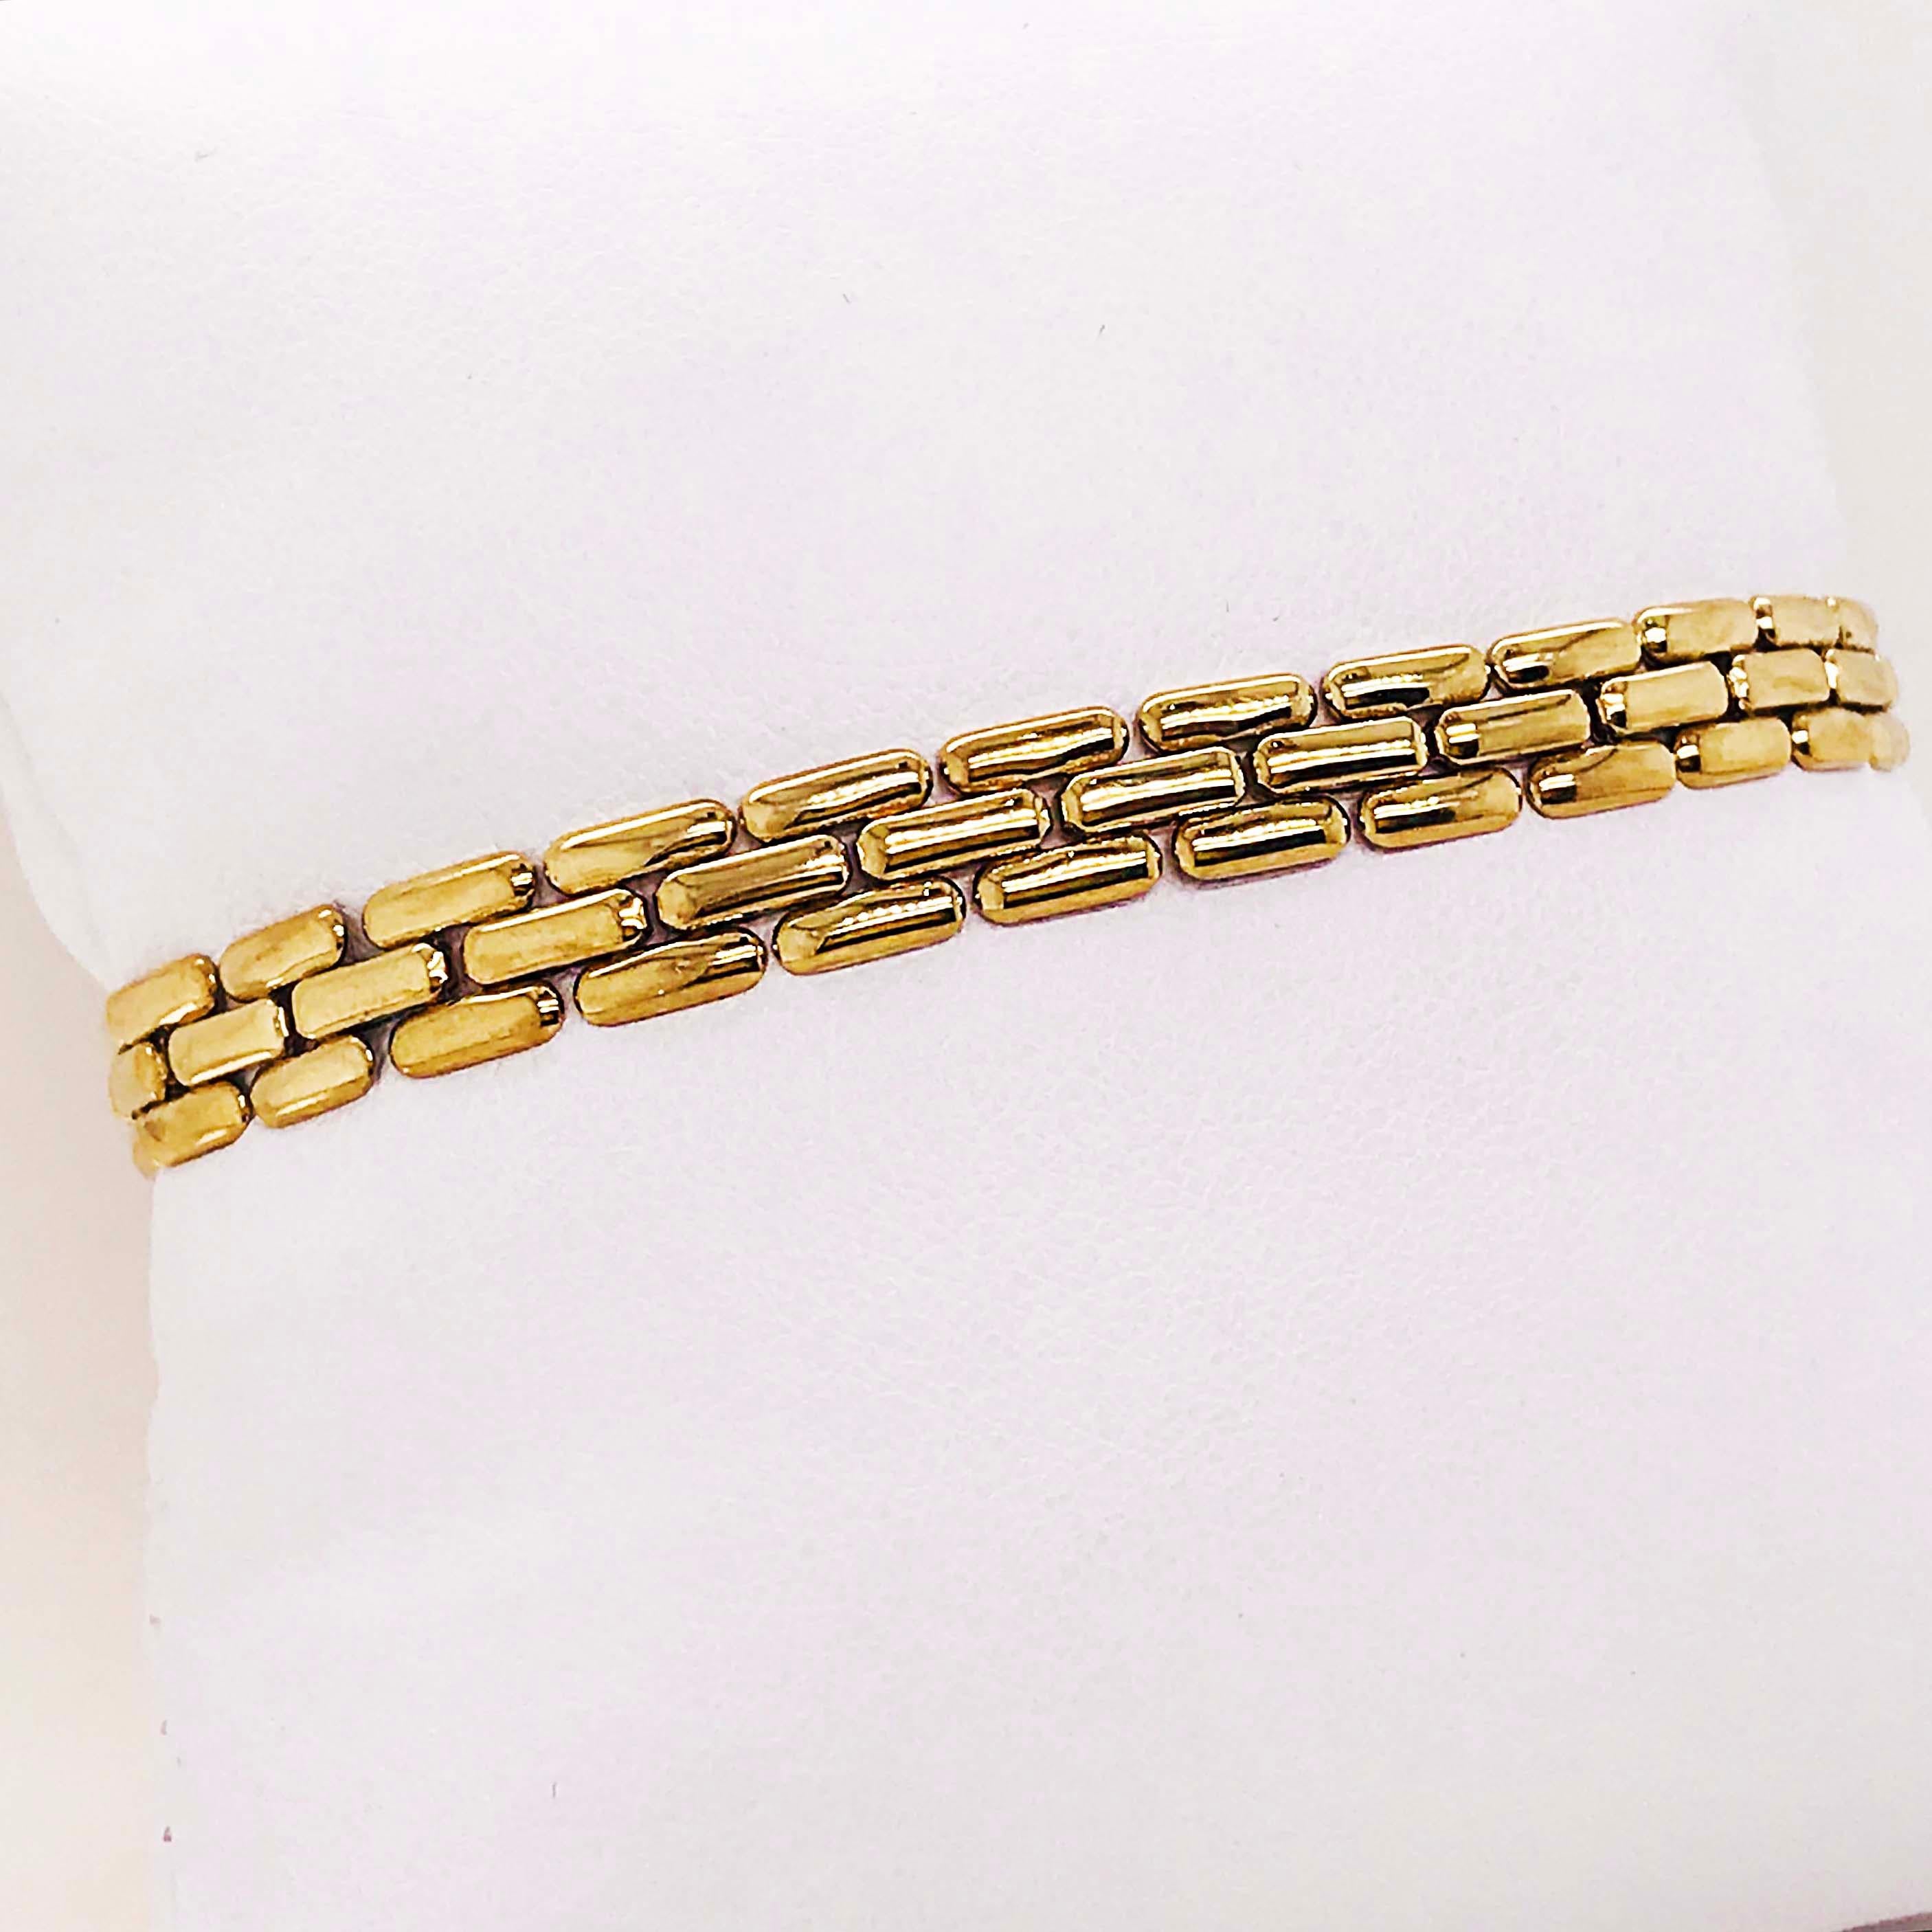 Gold Panther Chain Bracelet with Large Lobster Clasp, 14 Karat Yellow Gold 2